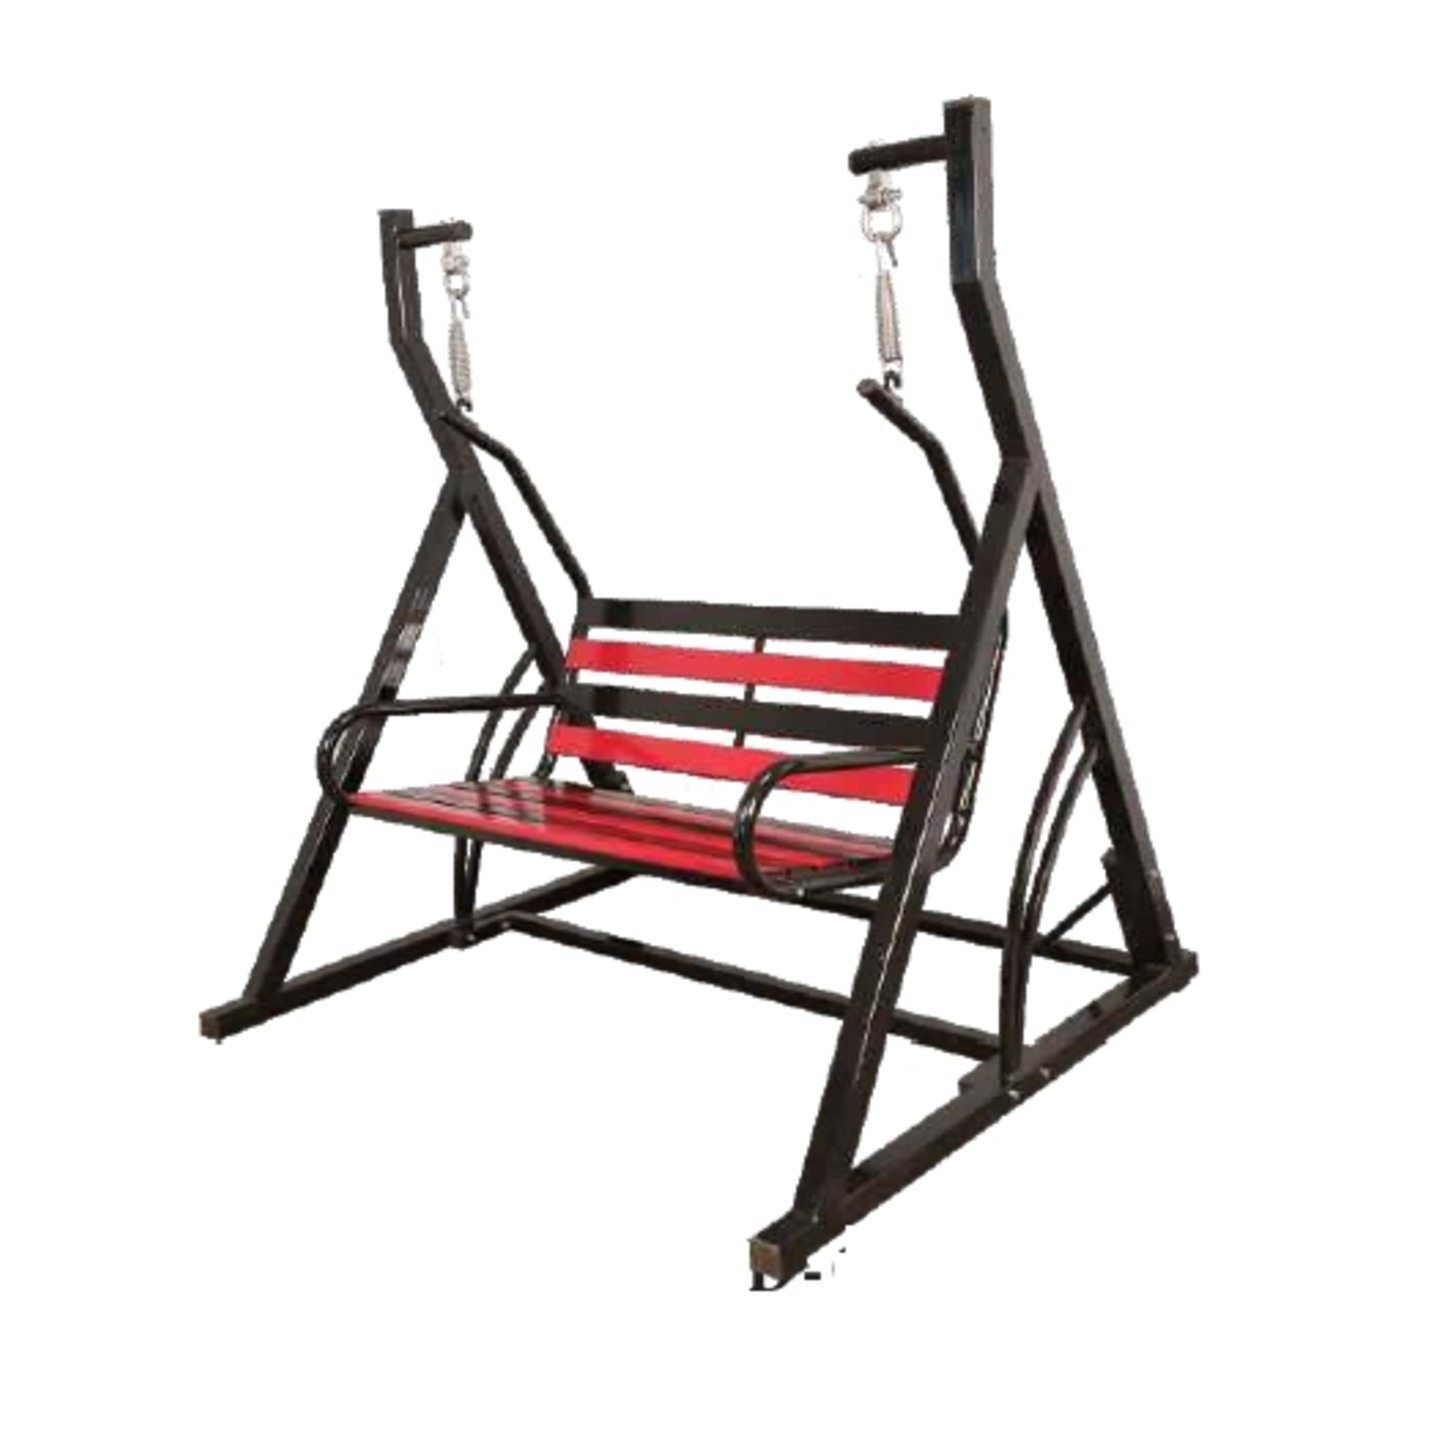 HJA Swing With Stand HOJ-042 In Black & Red Colour